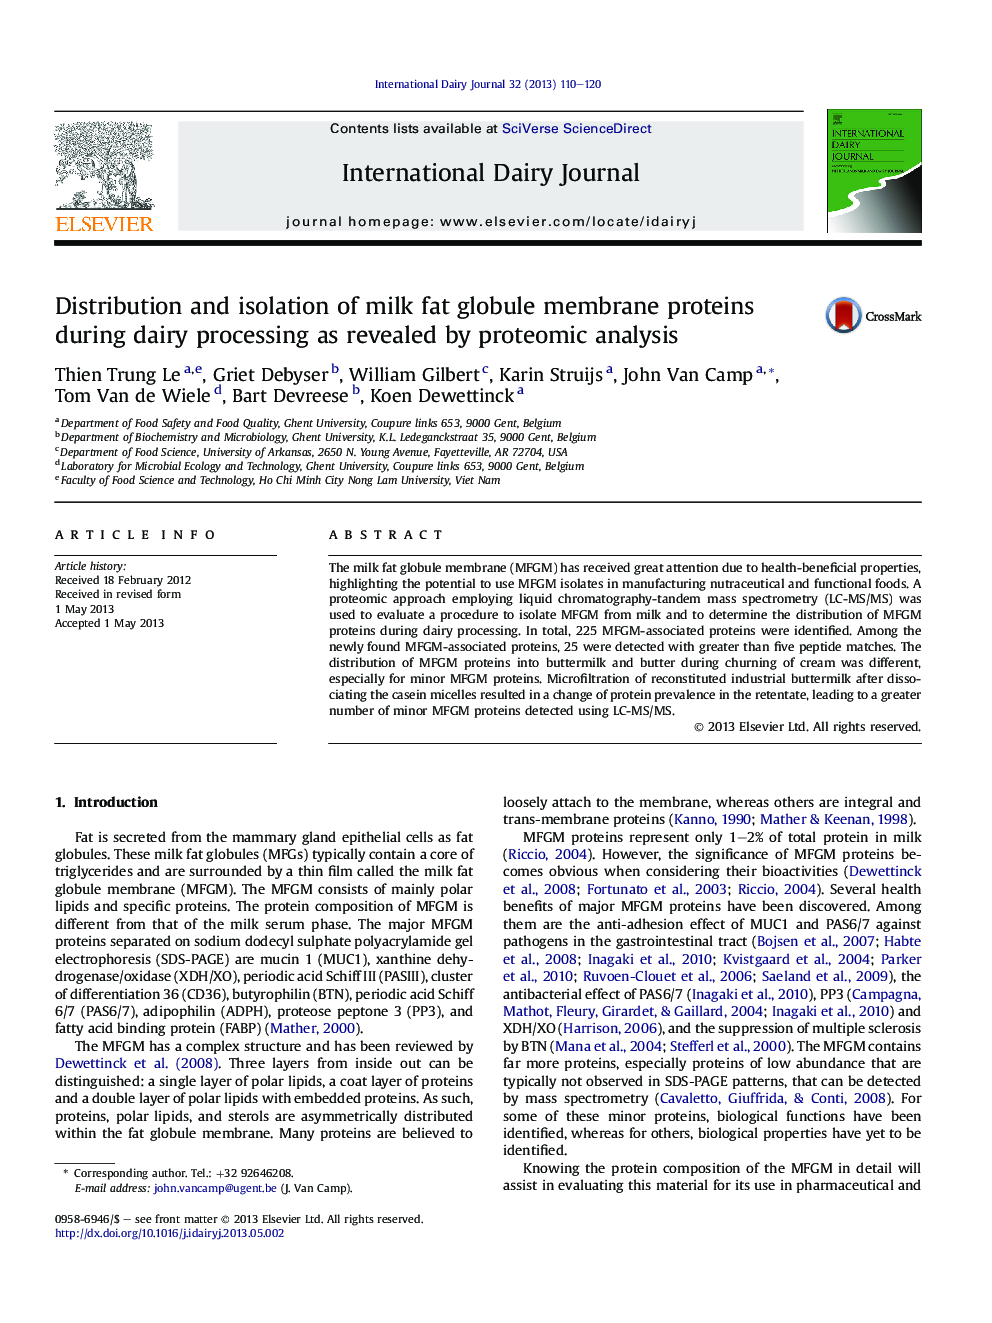 Distribution and isolation of milk fat globule membrane proteins during dairy processing as revealed by proteomic analysis